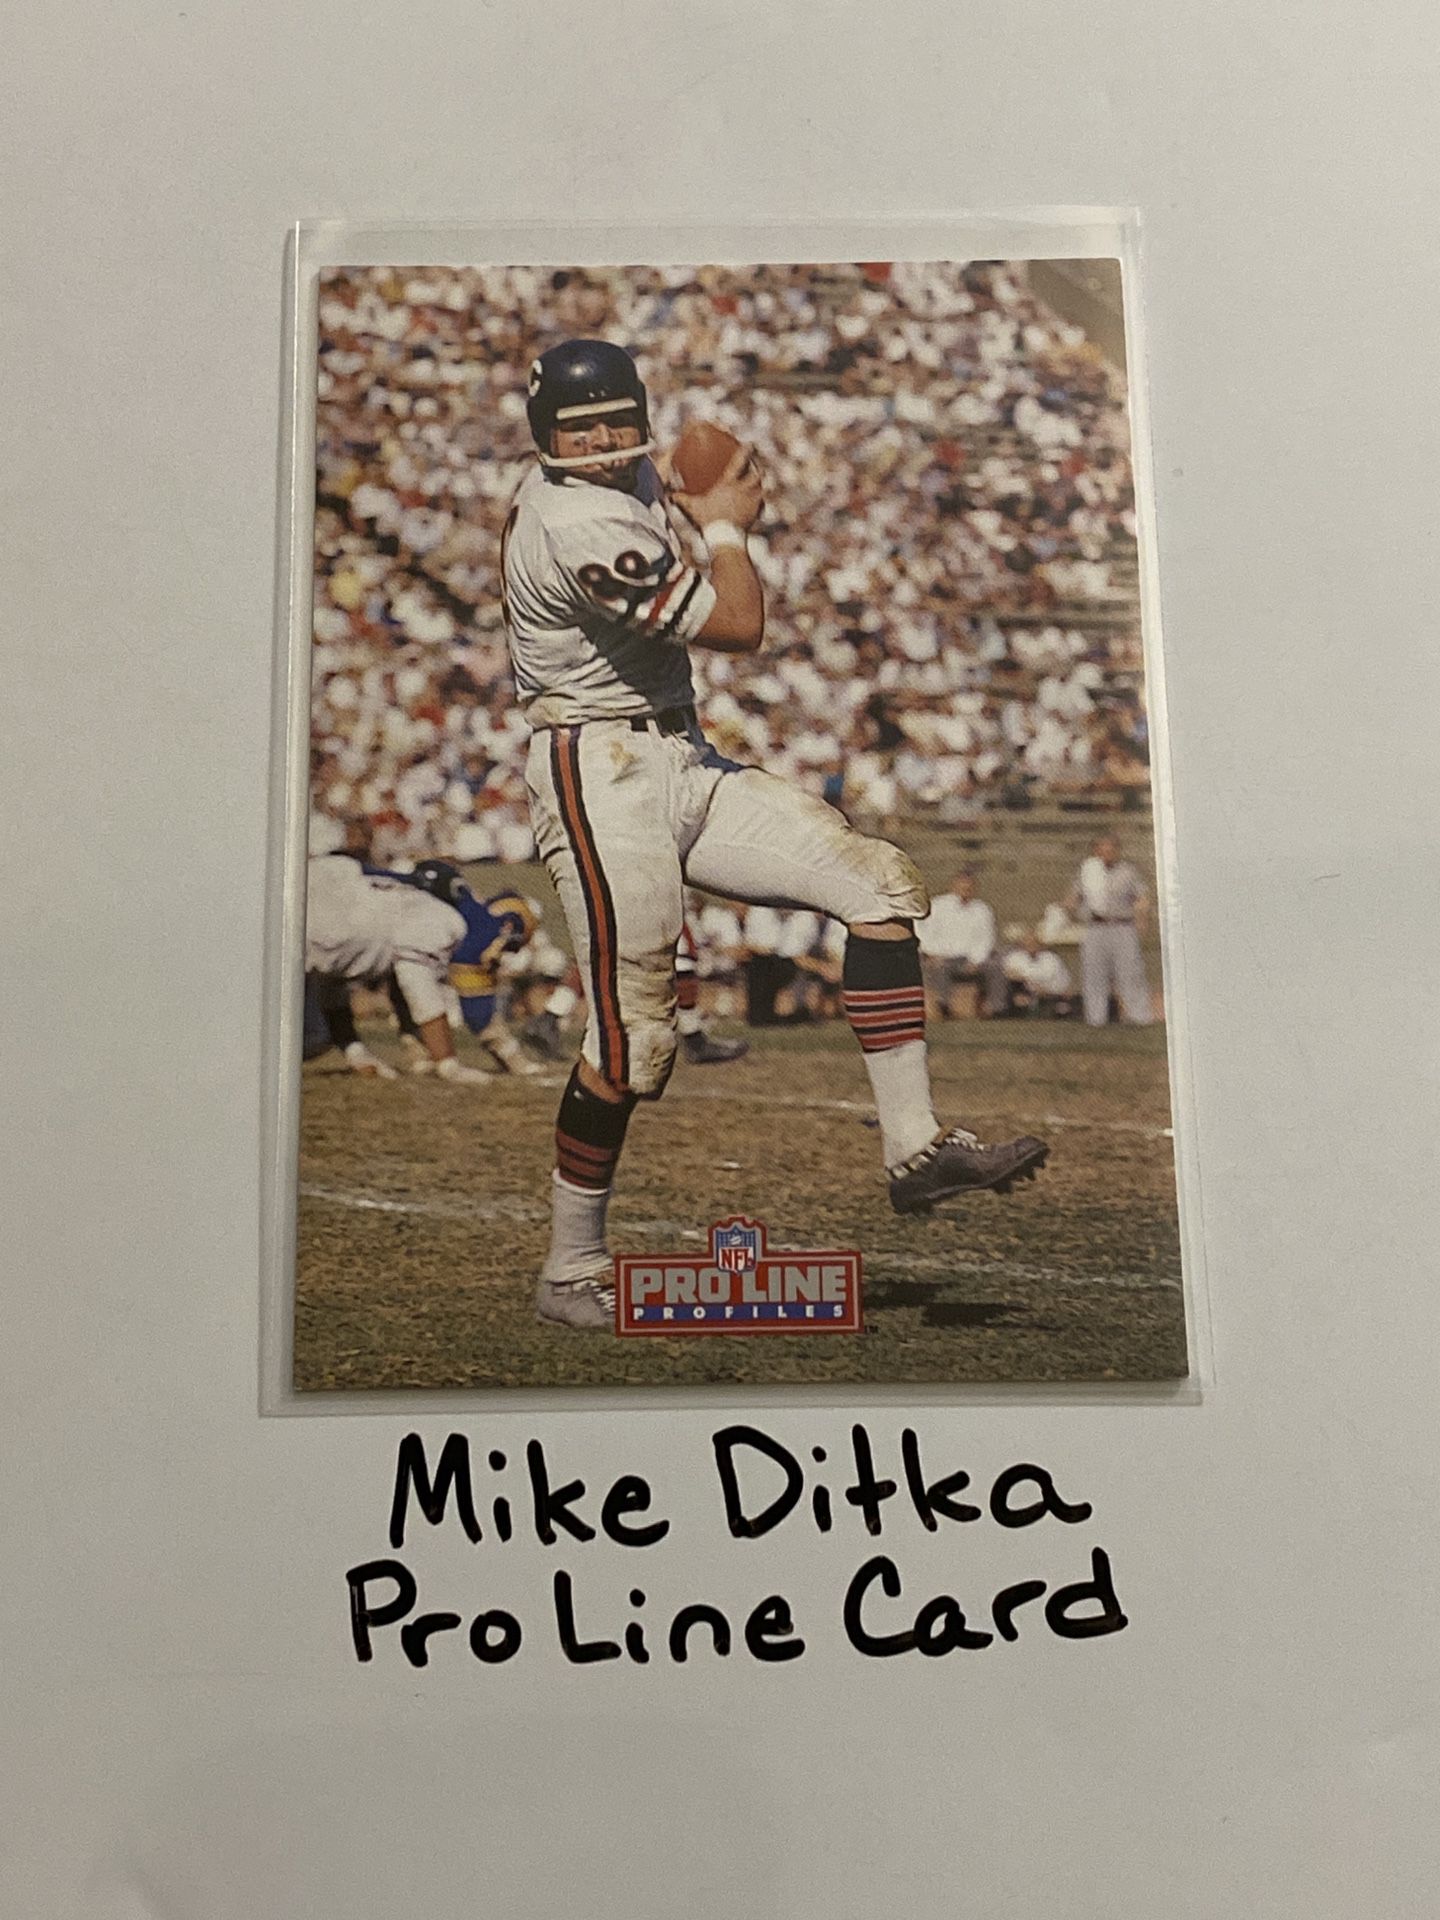 Mike Ditka Chicago Bears Hall of Fame TE Pro Line Card. 